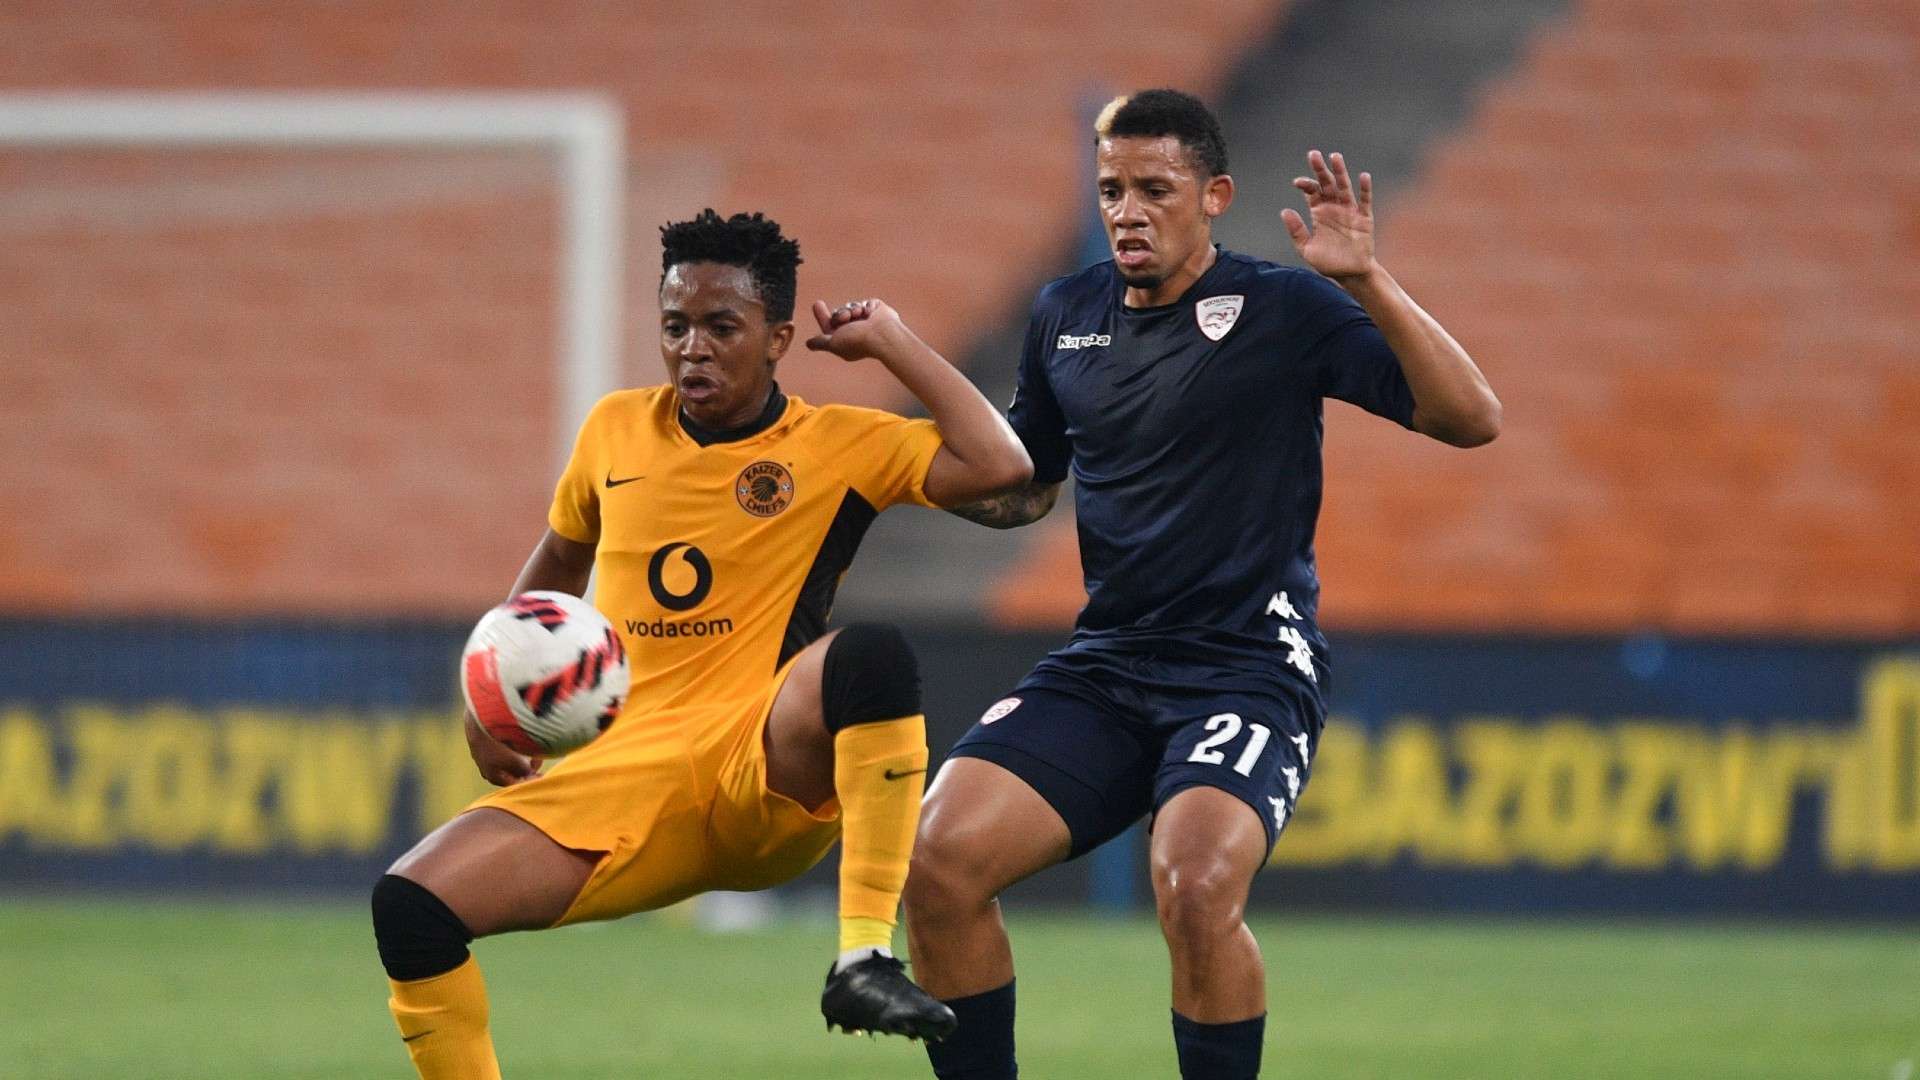 Cheslyn Jampies of Sekhukhune United FC challenges Nkosingiphile Ngcobo of Kaizer Chiefs, December 2021